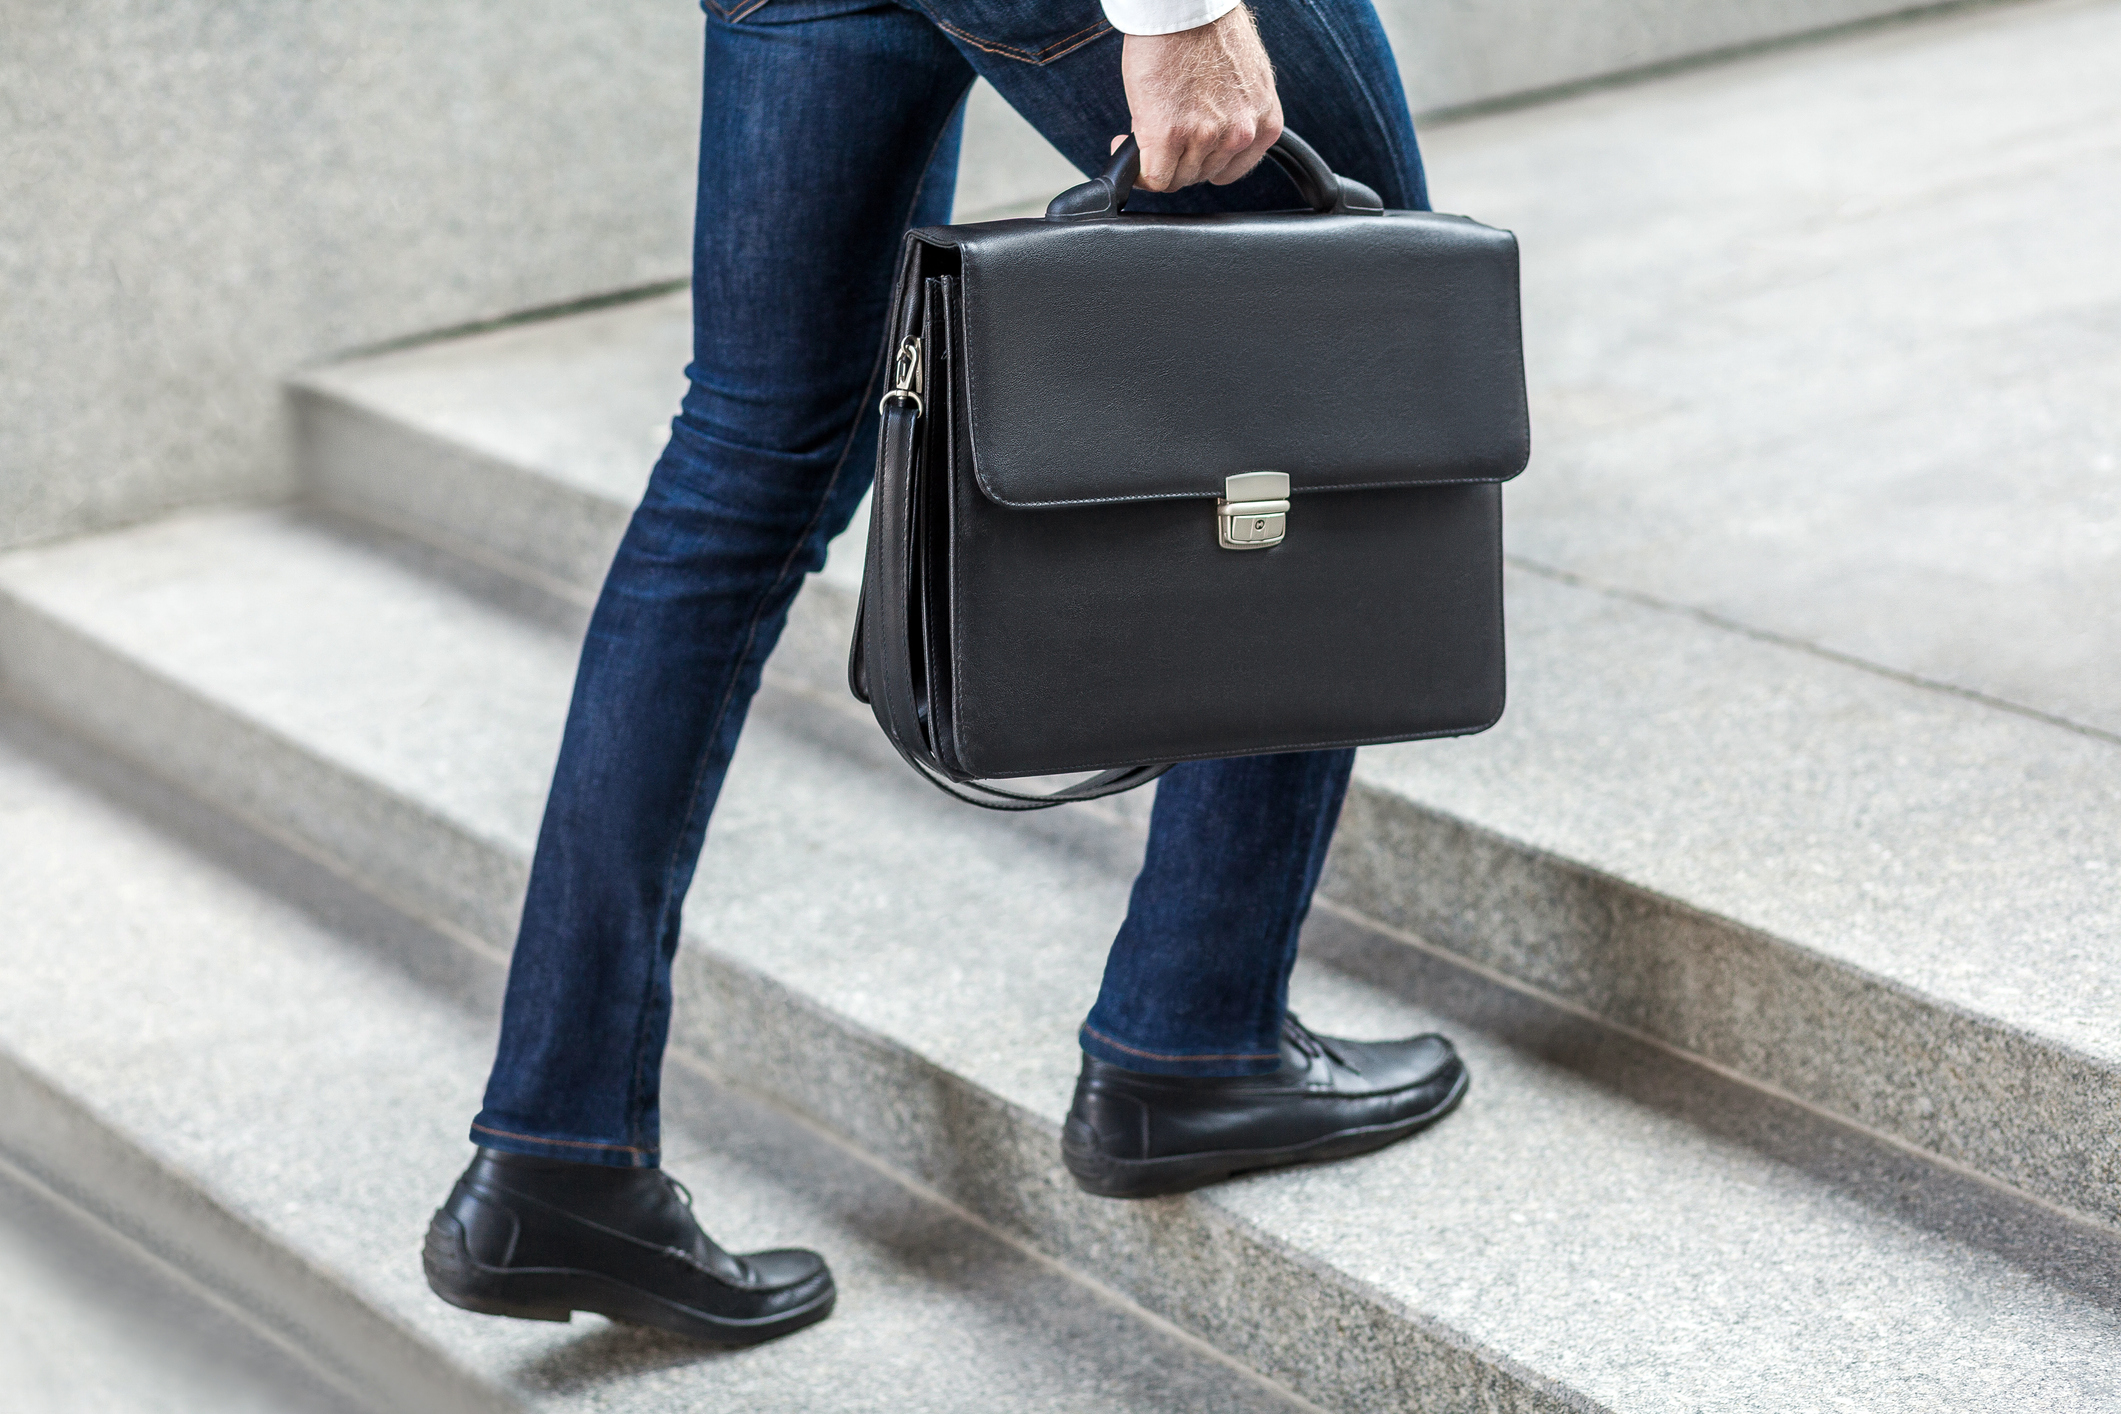 Person in jeans and dress shoes carrying a briefcase while walking up a staircase